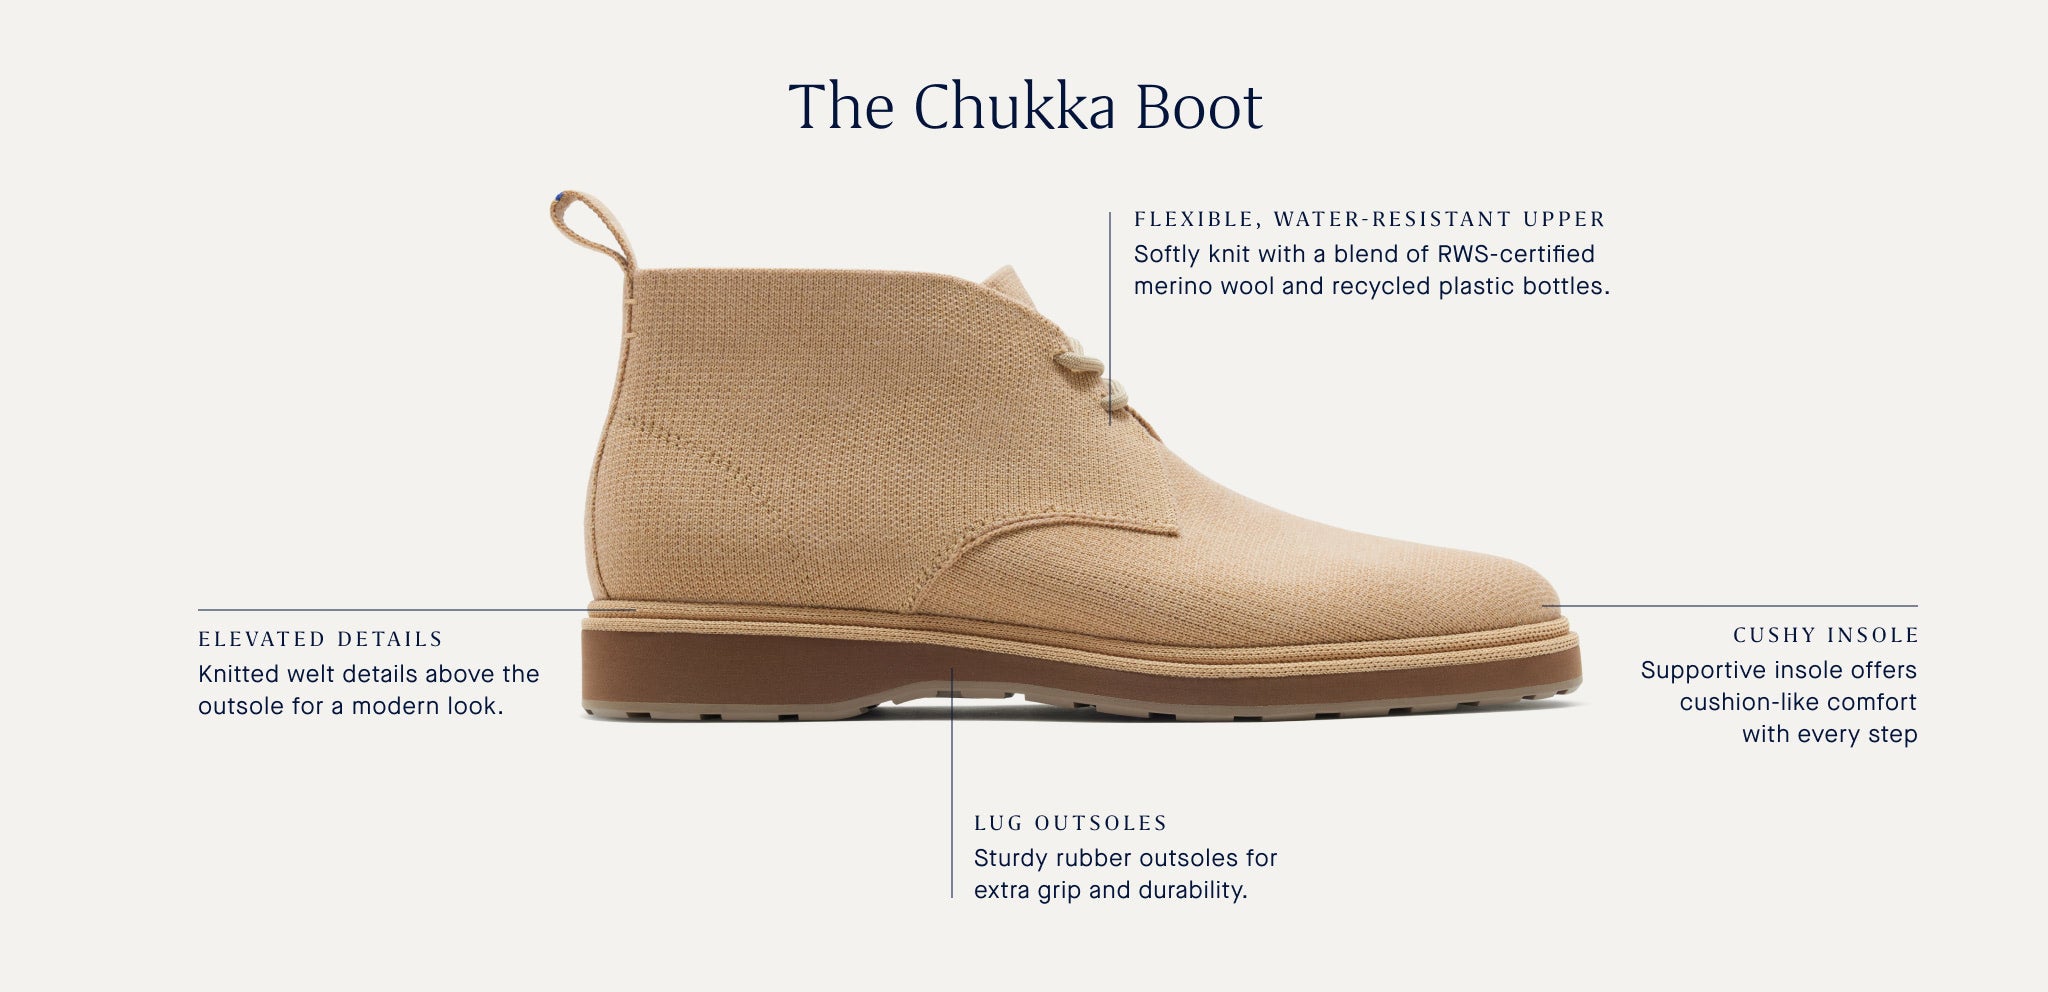 The Chukka Boot shown from the side, with arrows pointing to different details that speak to water resistant upper, cushy insole, lug outsoles and elevated design details. Above, a headline reads, "The Chukka Boot."